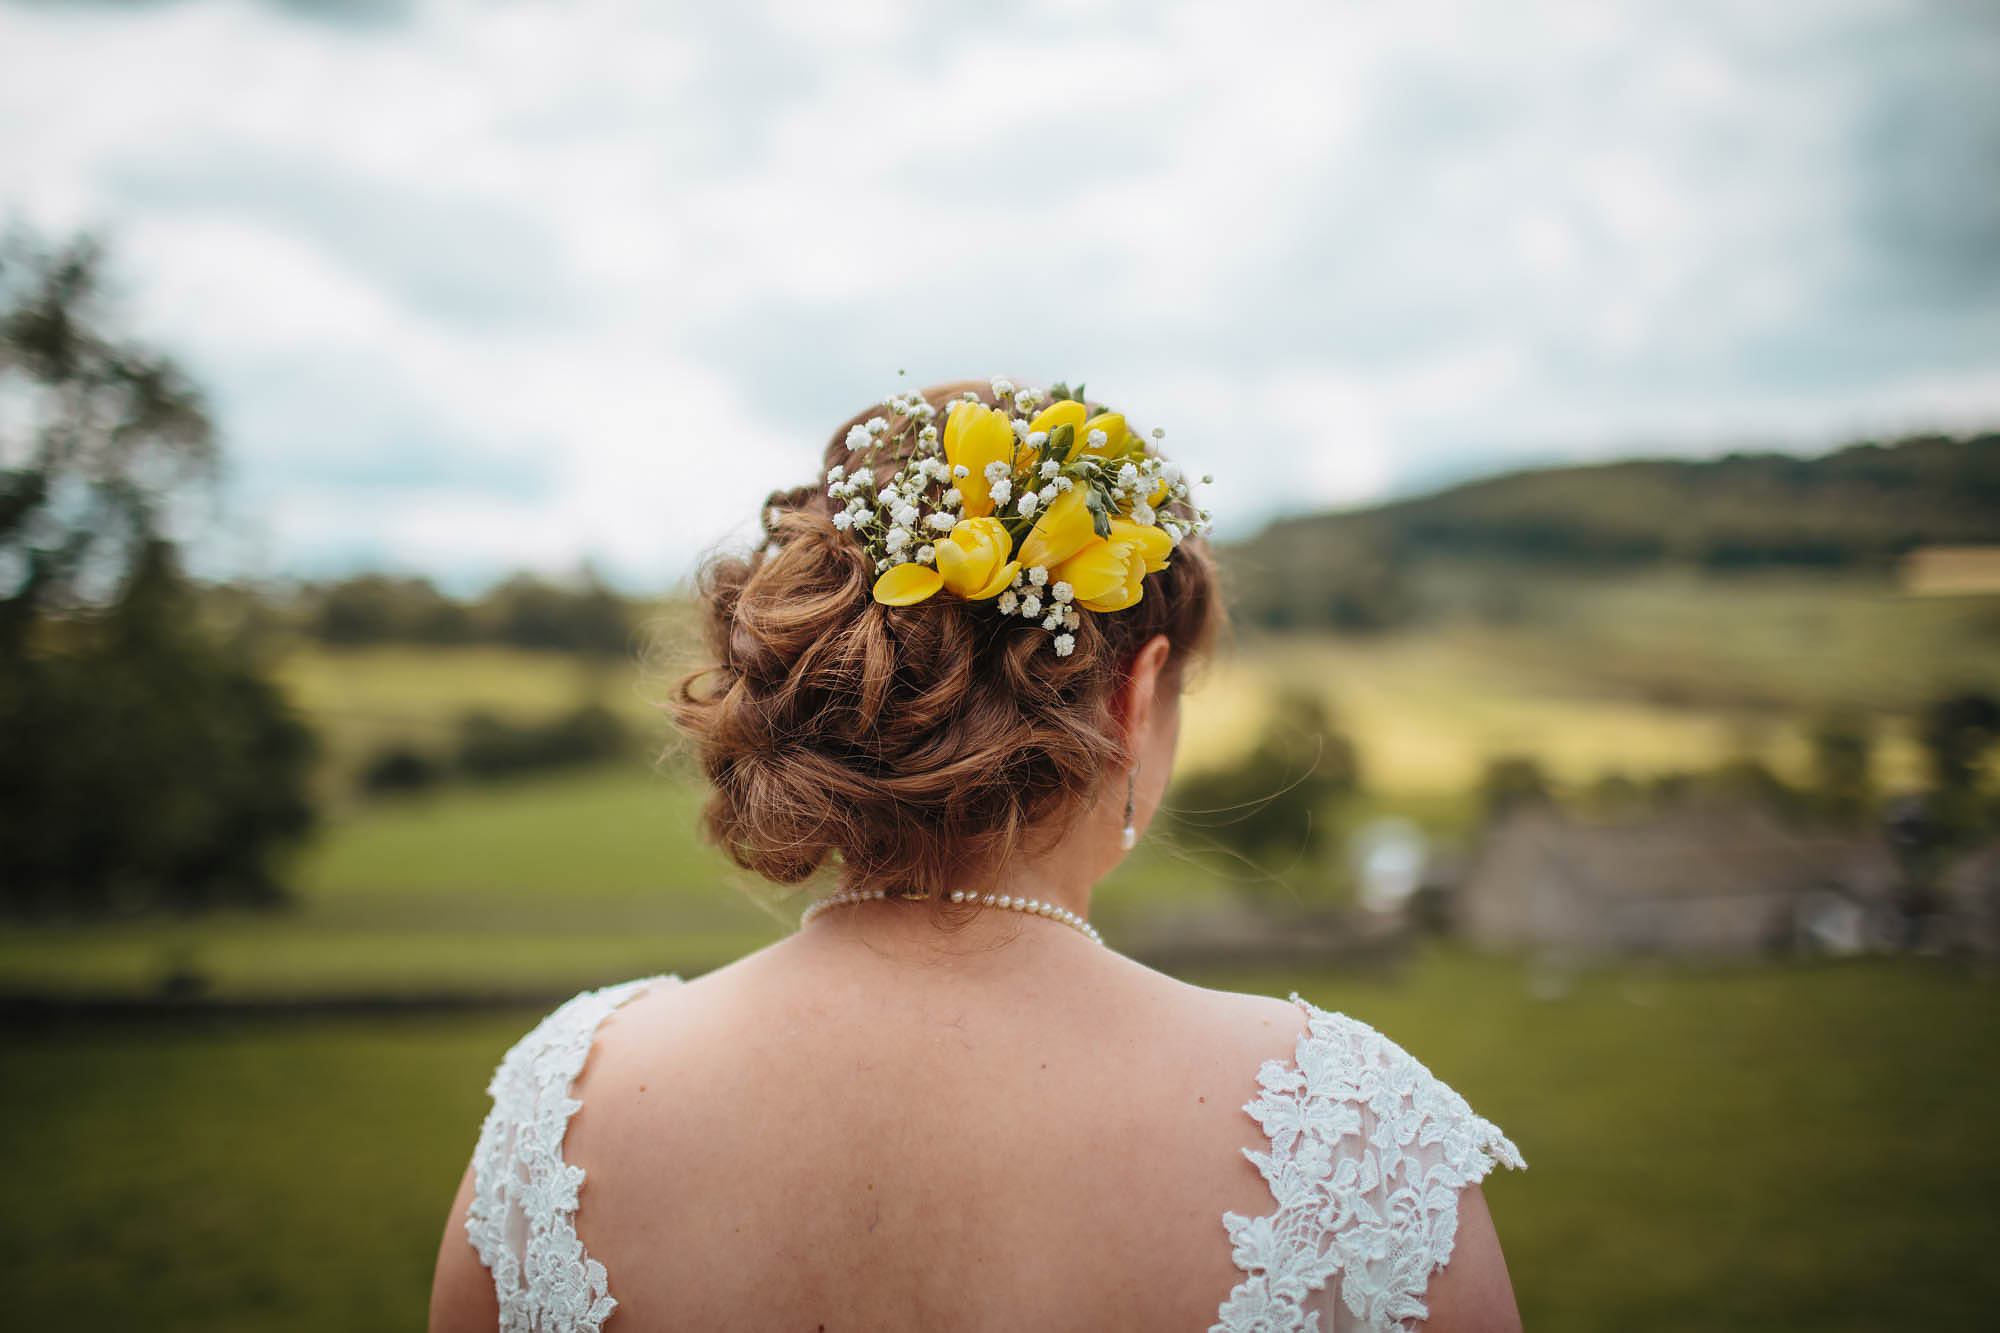 Bride and hair flowers in the Yorkshire Dales Appletreewick